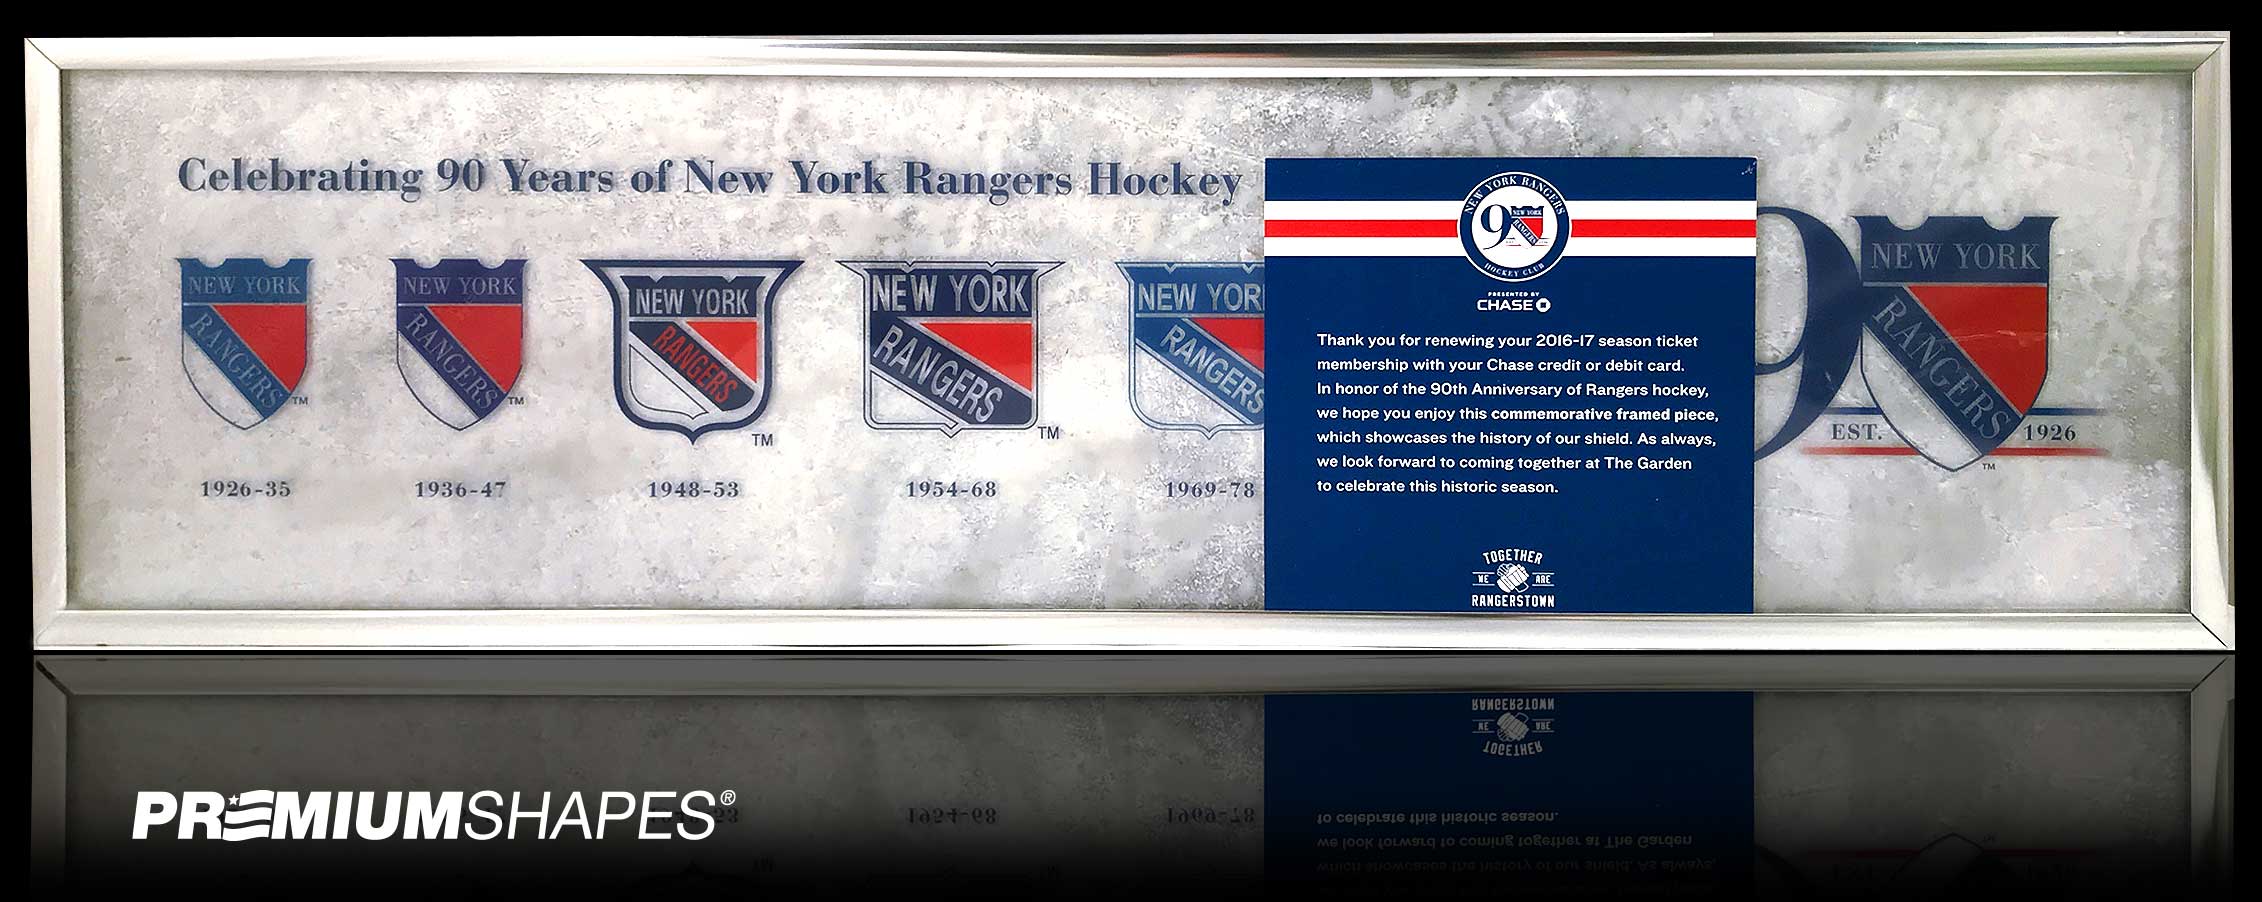 This Rangers season ticket holder gift had an amazing 3D effect. We took 5 different layers of plastic to give the season ticket holders something they would want to hang on their wall.